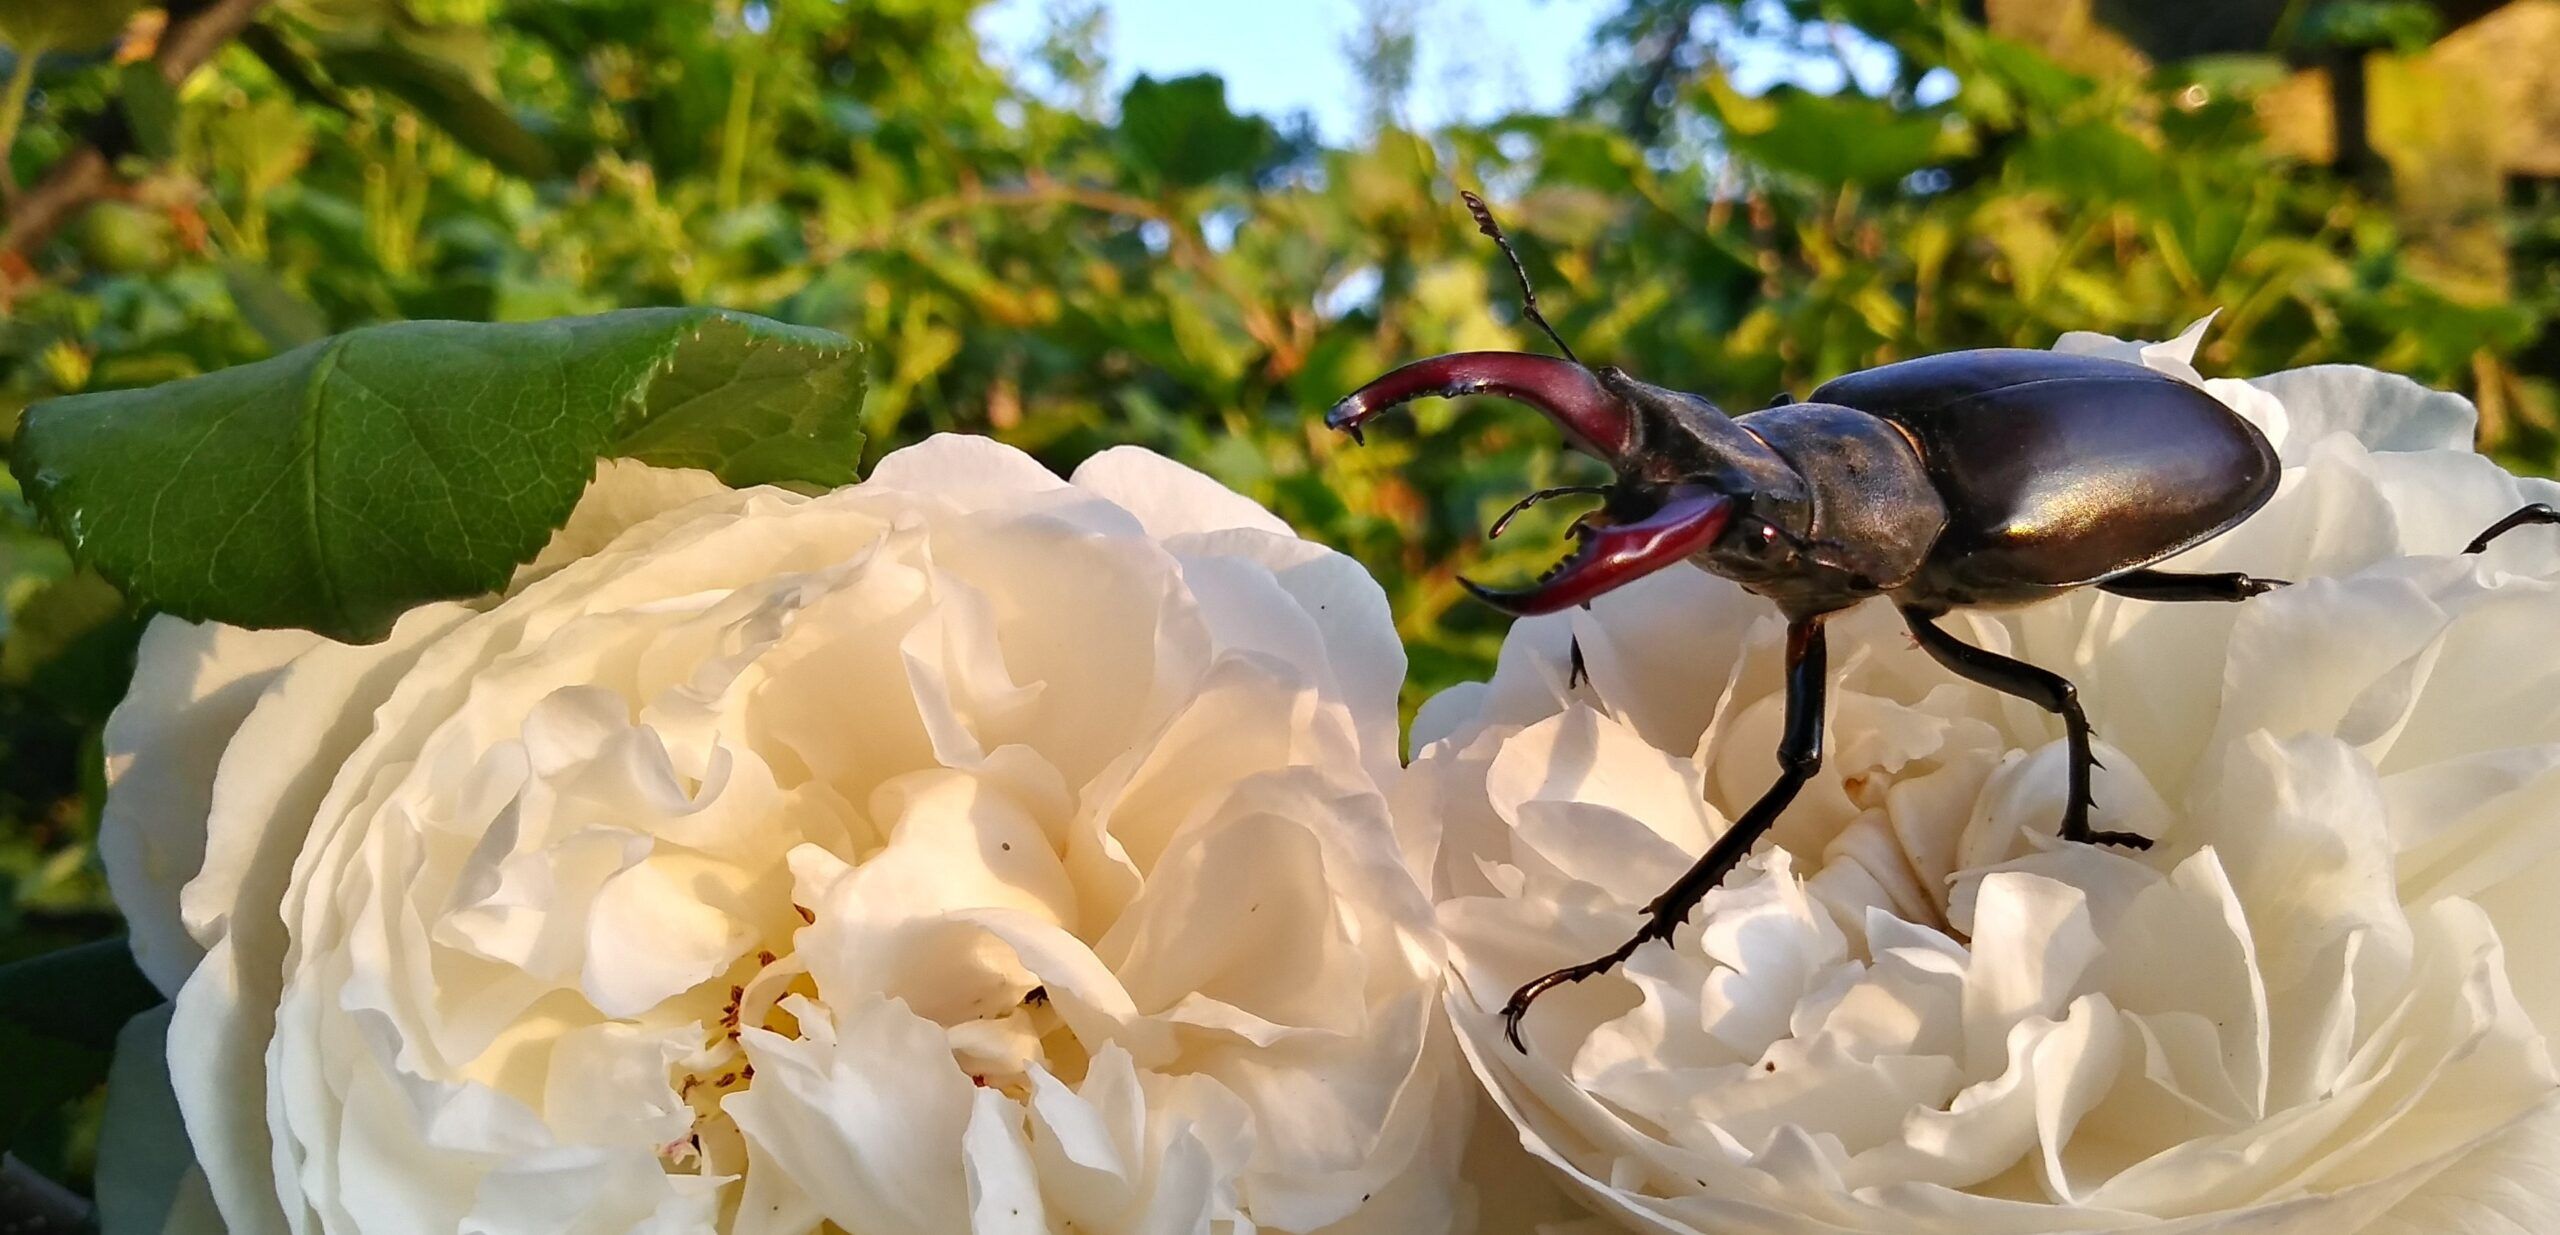 Male stag beetle on roses Duncan Wright